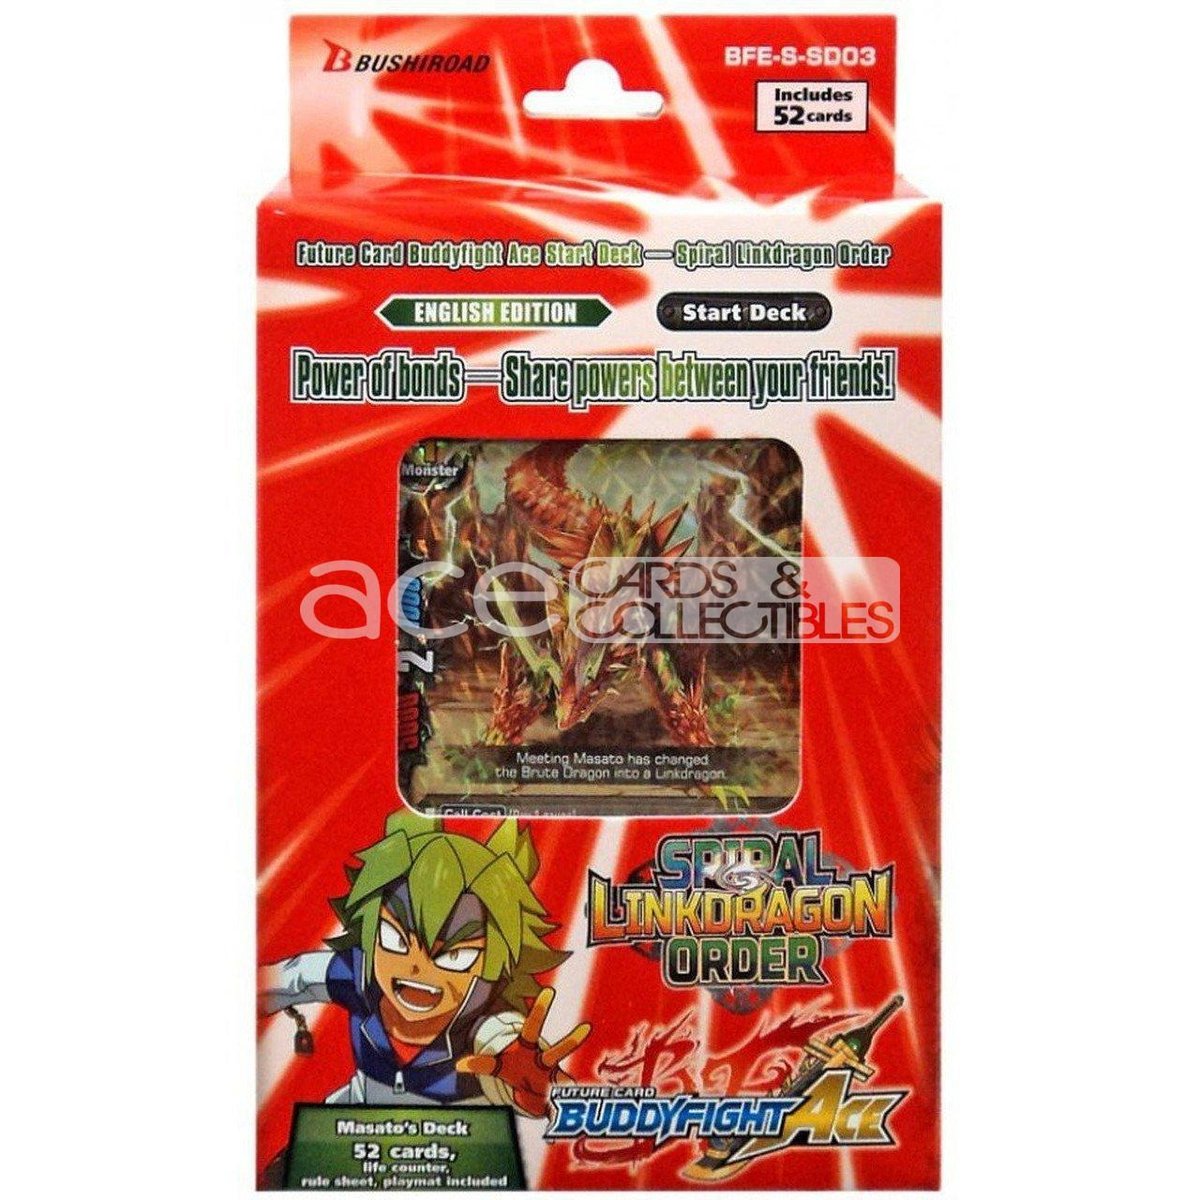 Future Card Buddyfight Ace Spiral Linkdragon Order [BFE-S-SD03] (English)-Bushiroad-Ace Cards & Collectibles